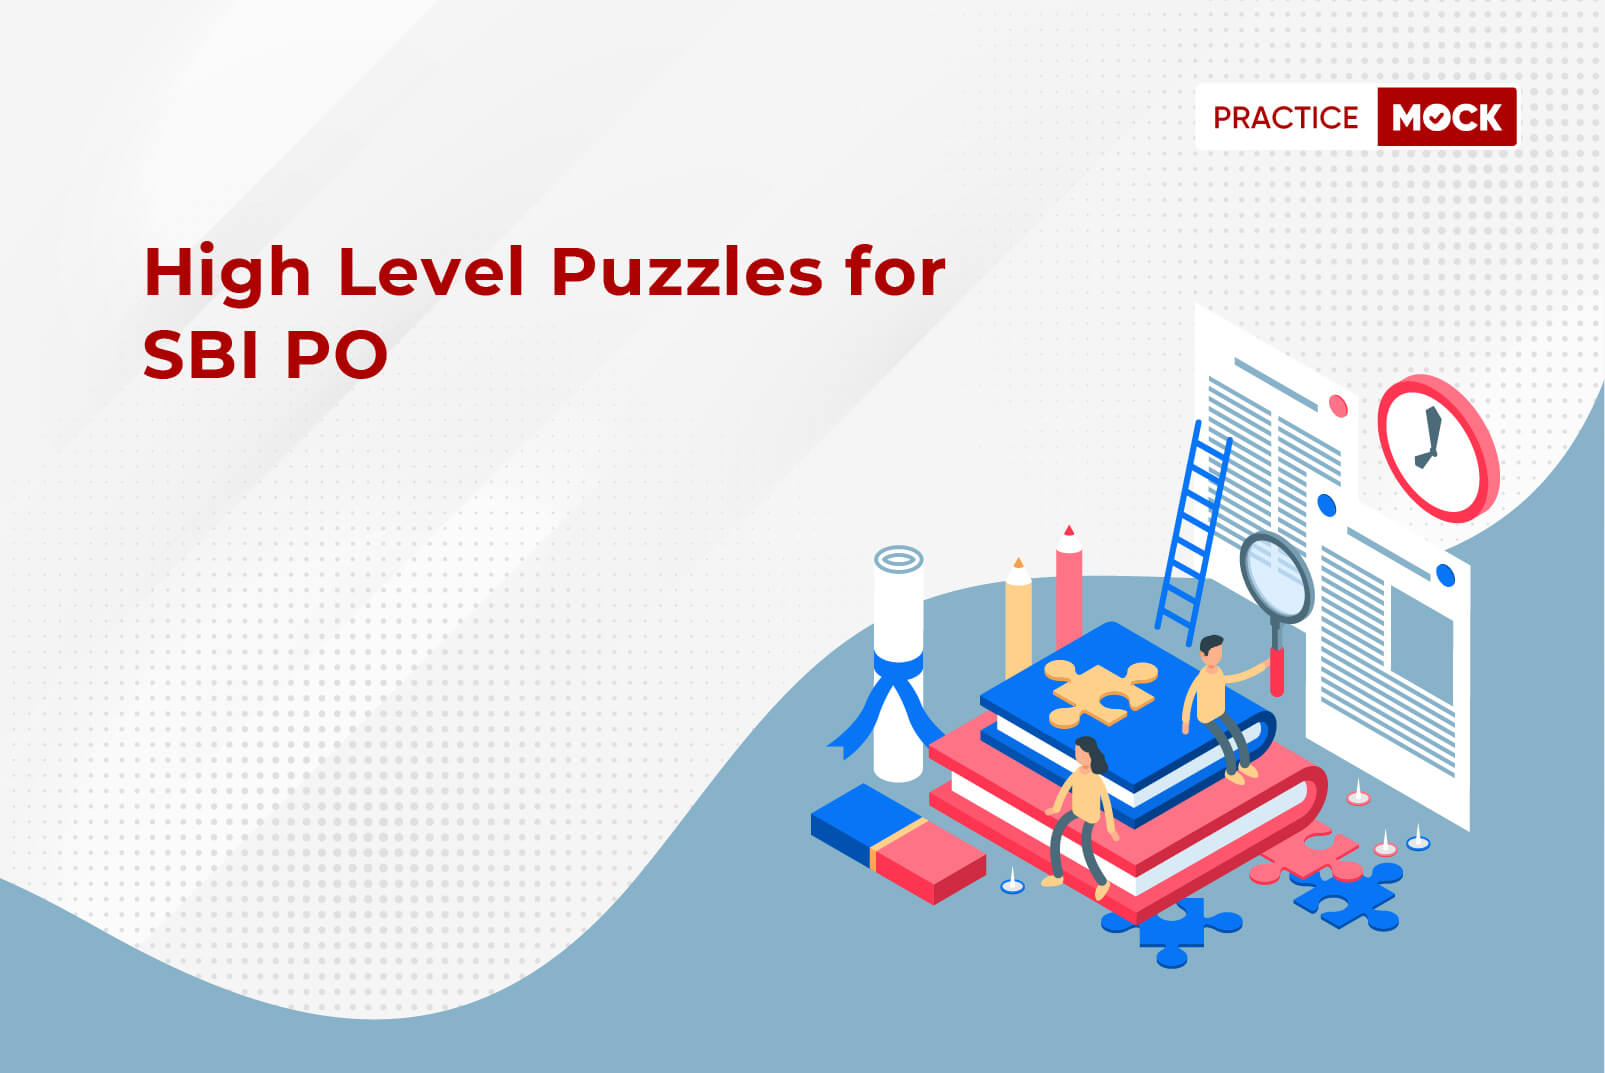 High level puzzles for SBI PO